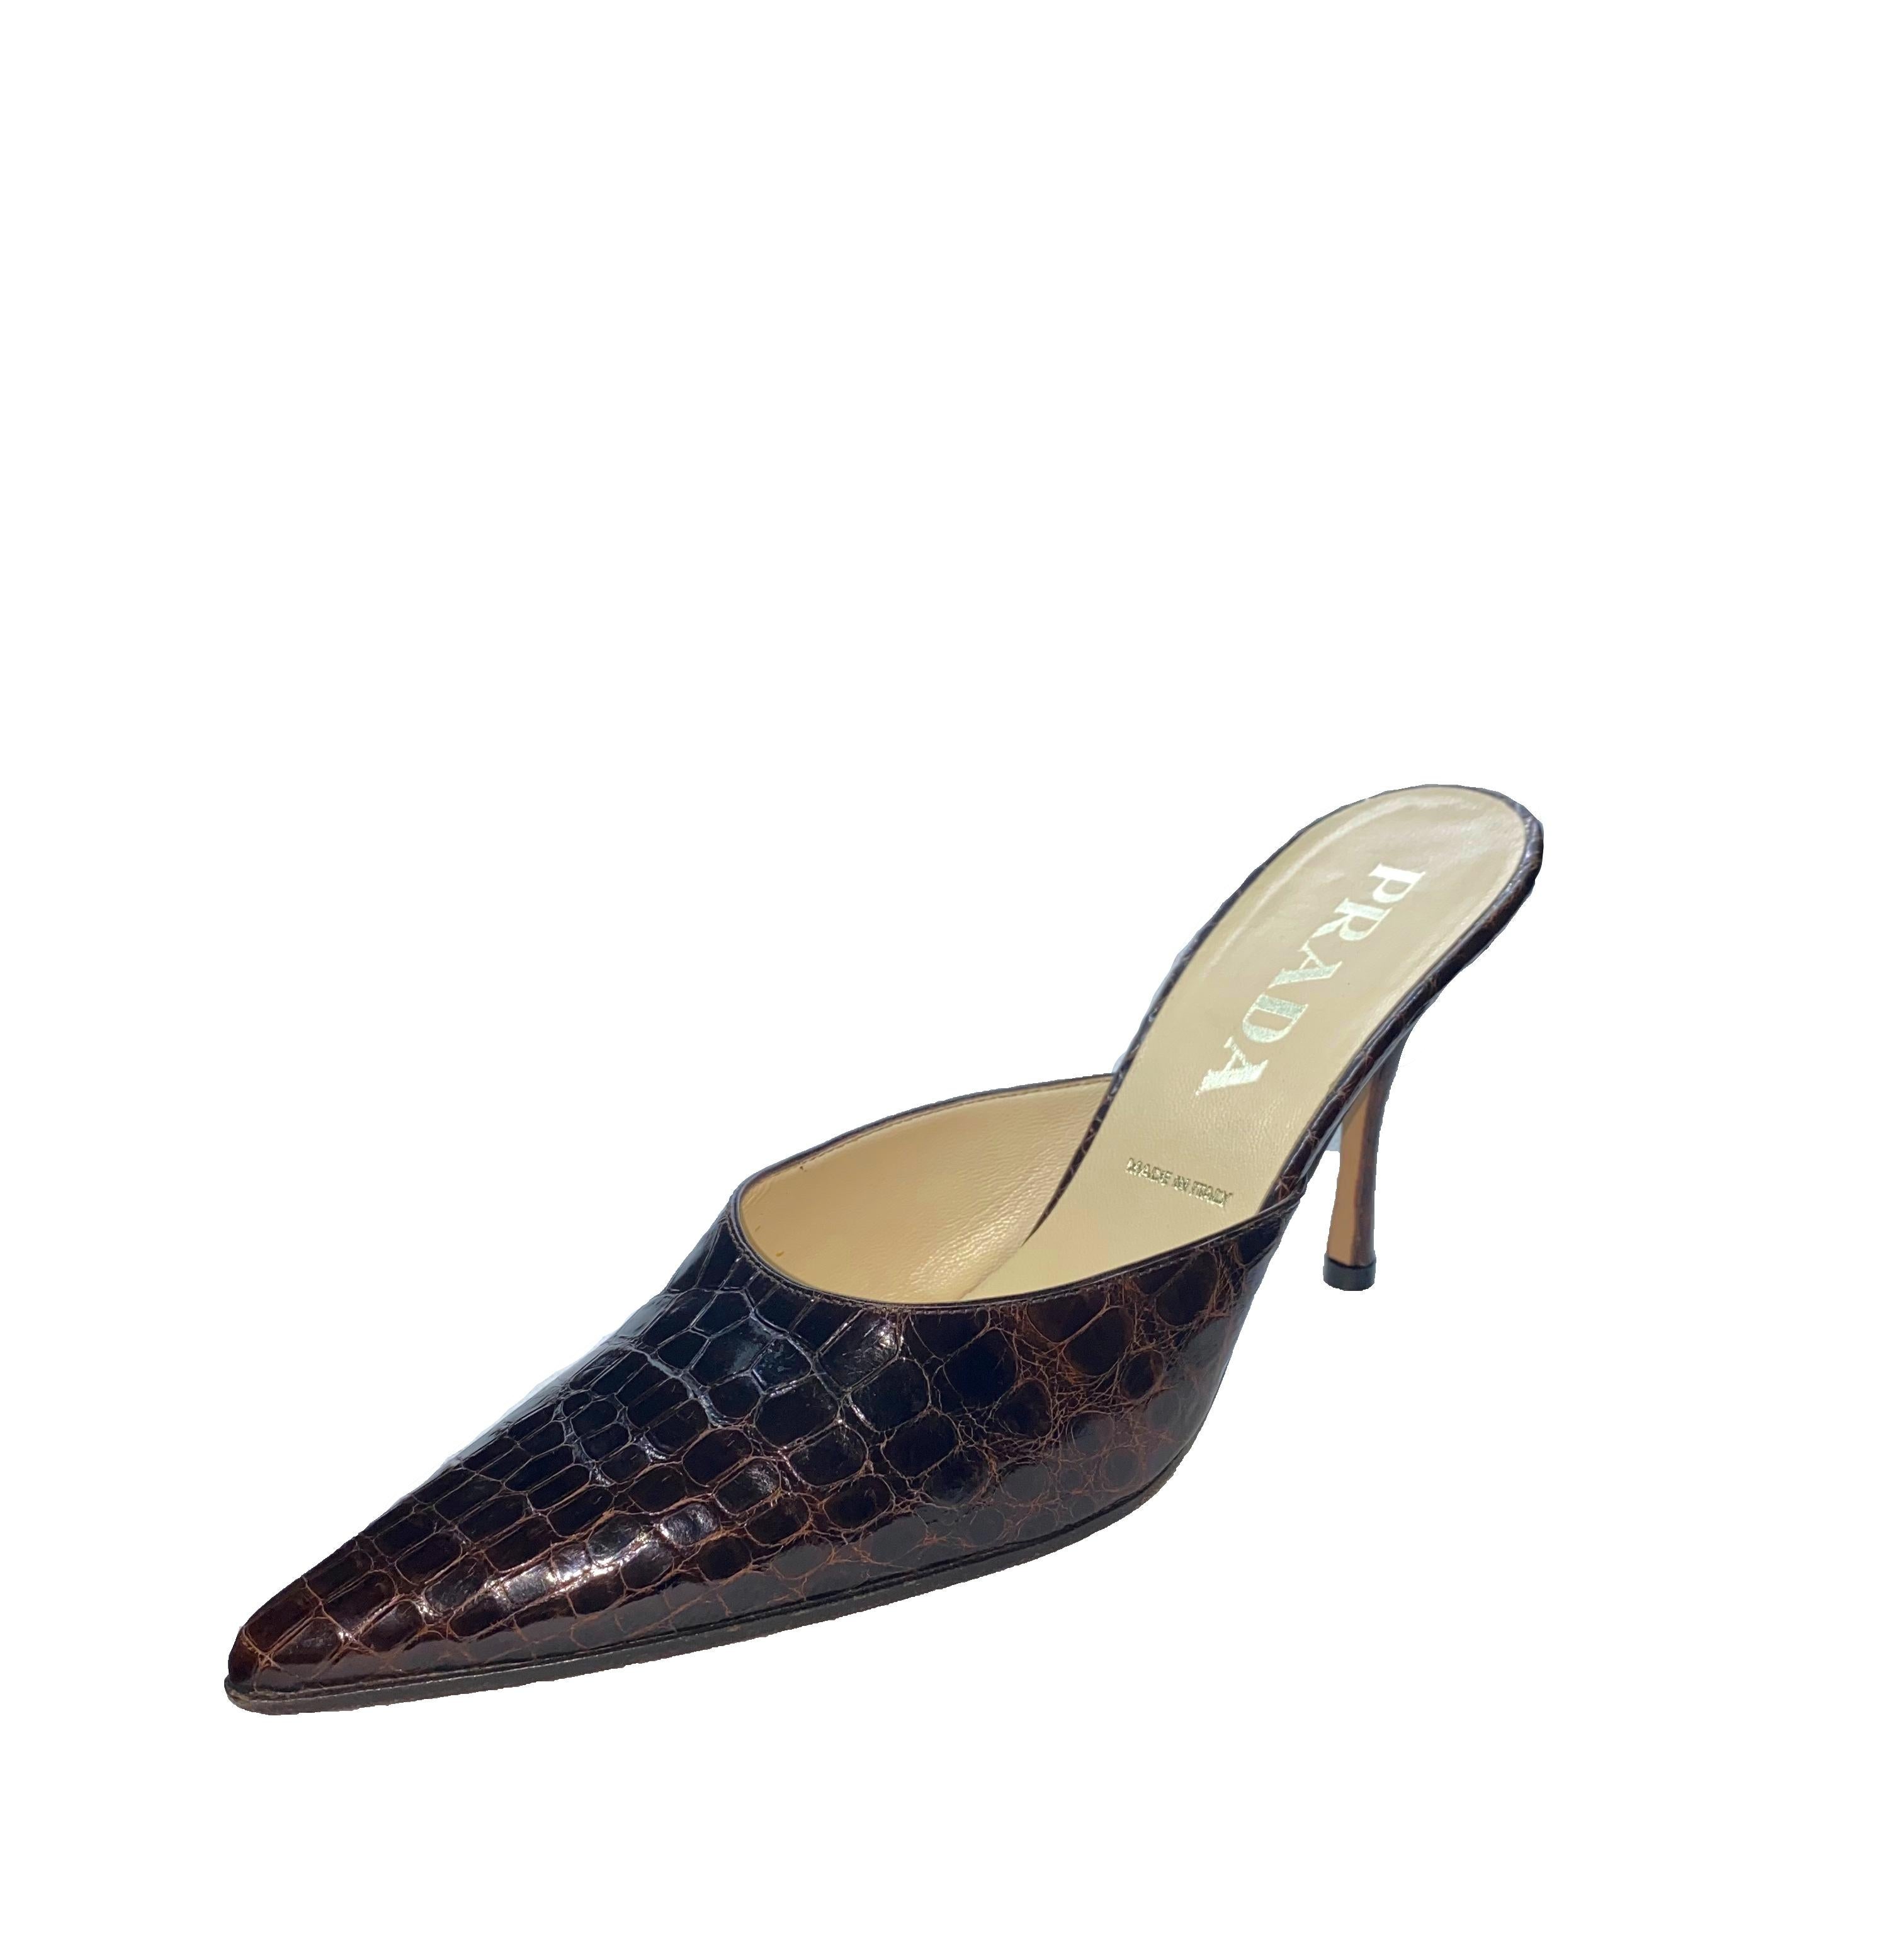 Beautiful Prada High Heel  Mules
Real  alligator skin in beautiful chocolate brown color - no print
From Prada's exotic skin collection
Classic style
Made in Italy
Size 36.5 EU
Comes with Prada dustbag
Retailed for 3299$ plus taxes
